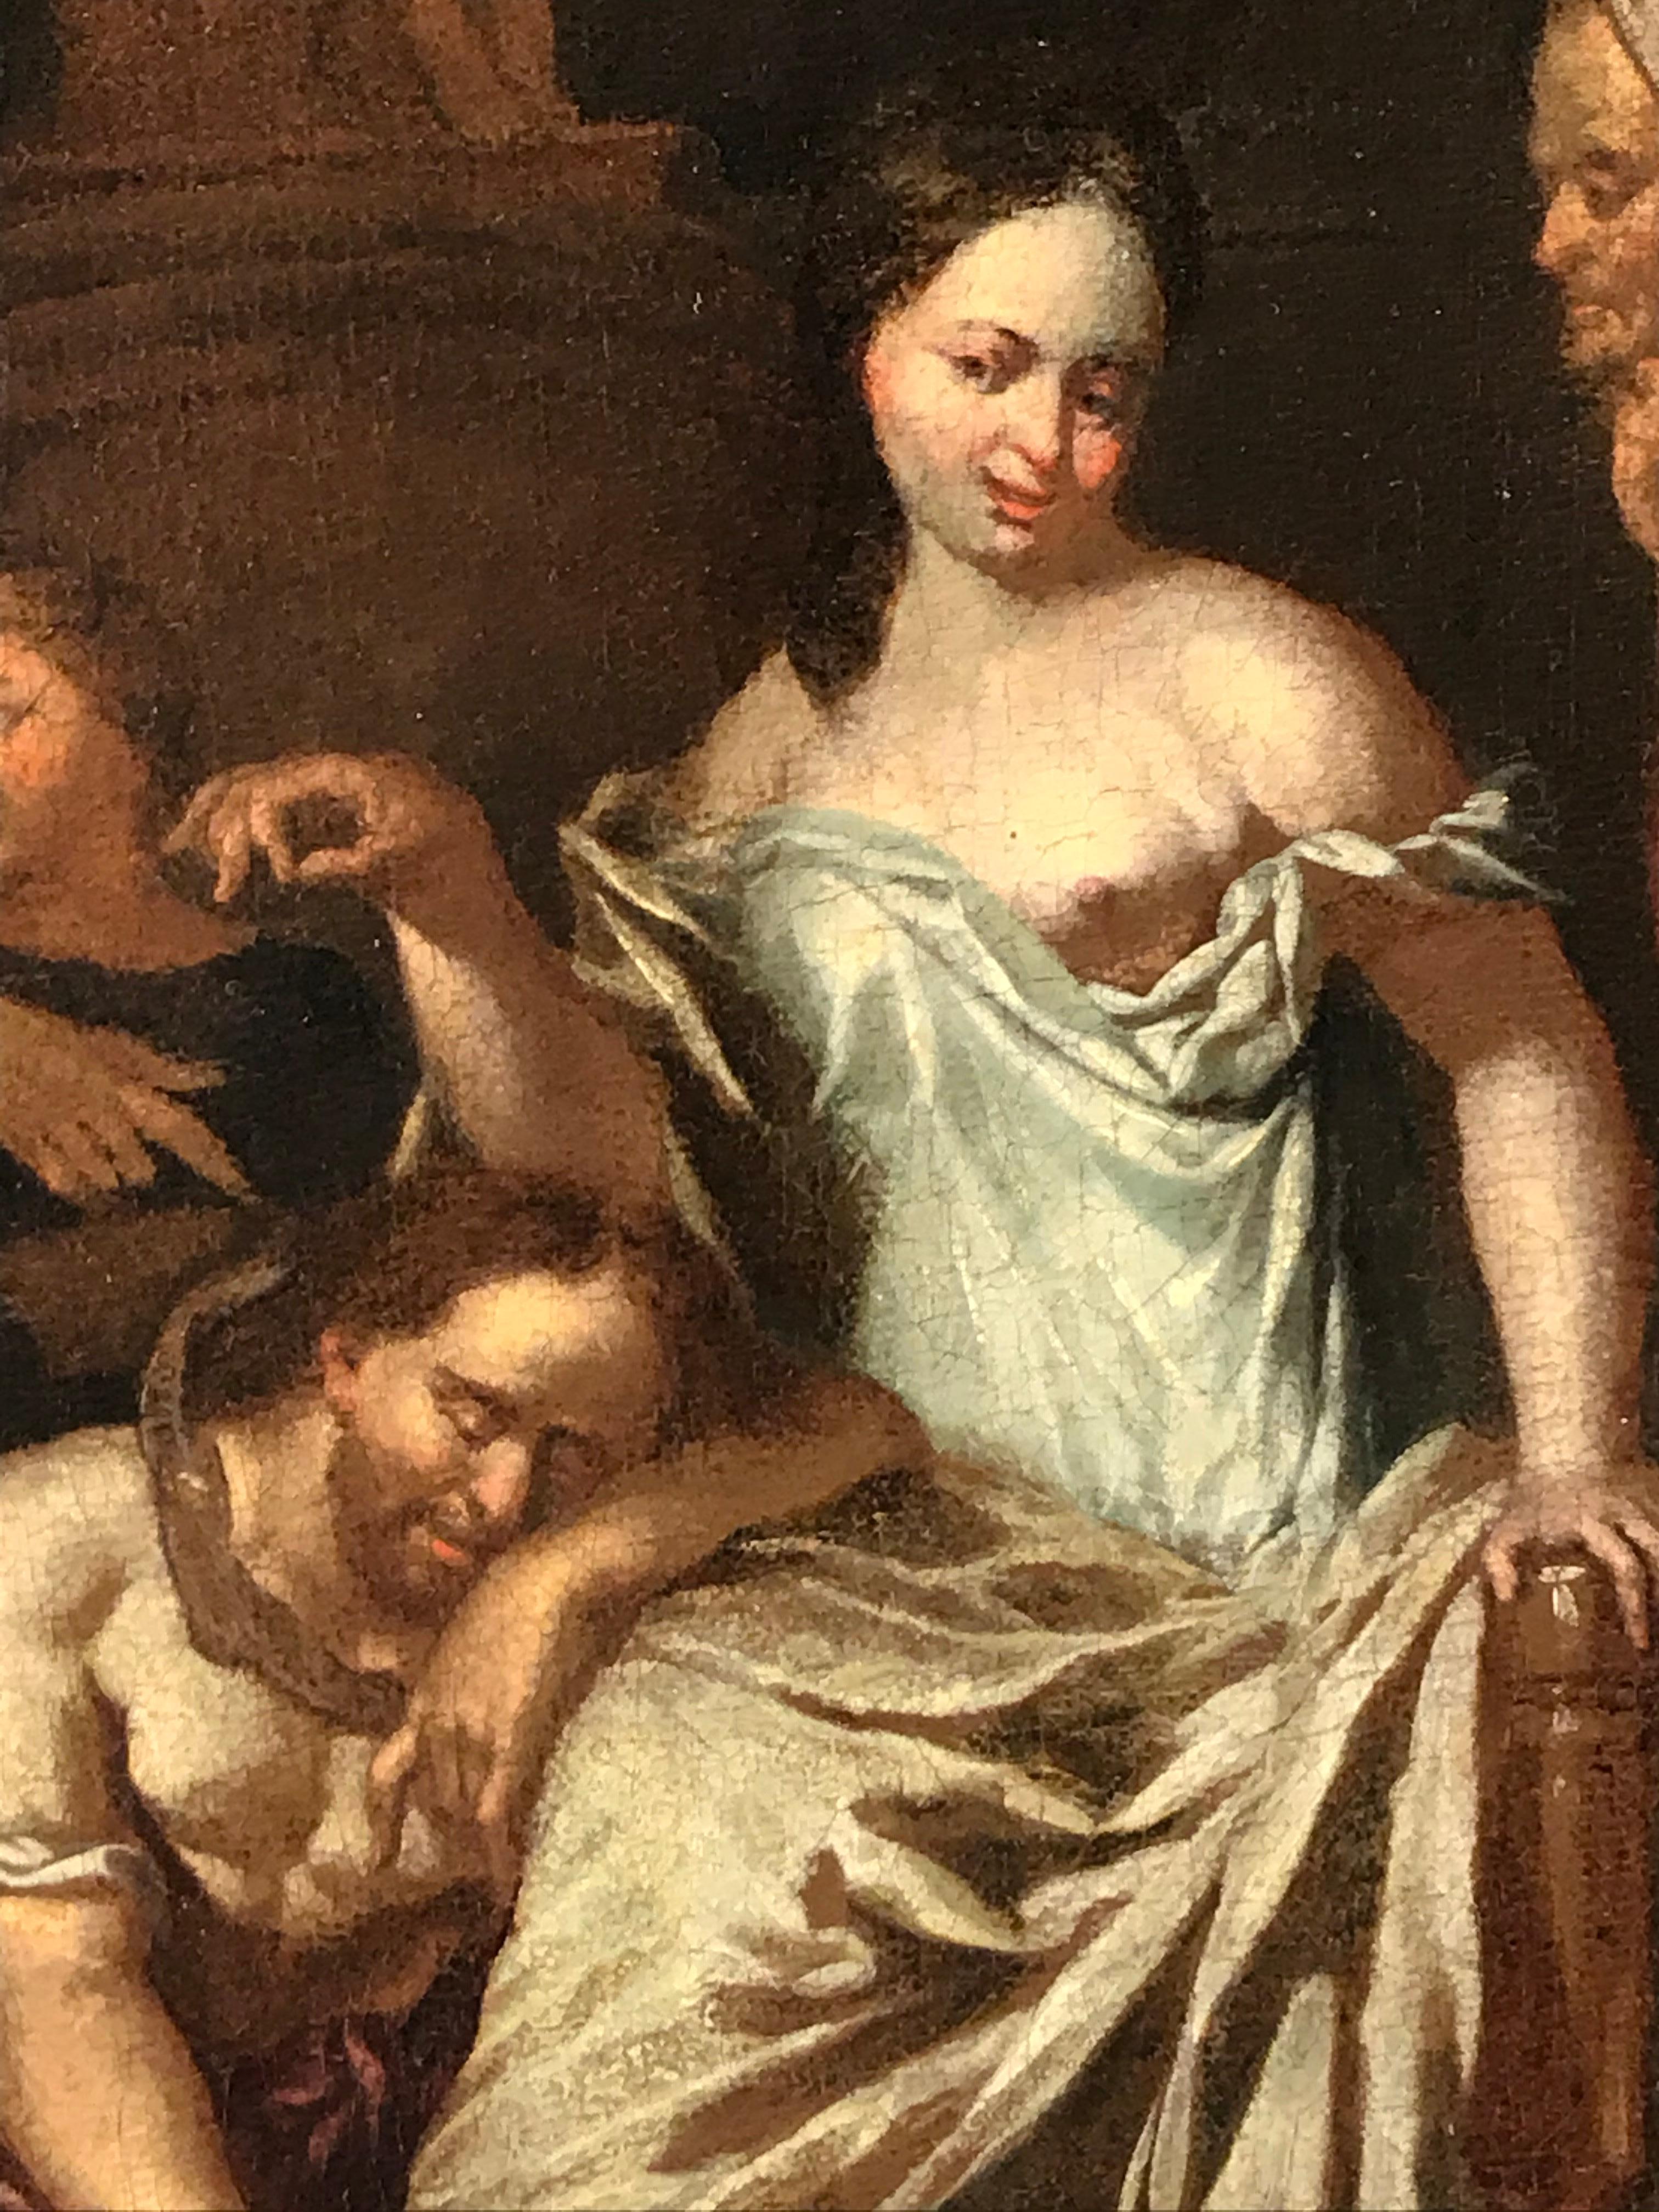 Unknown Flemish artist, 17th-18th century, “Judith and Holofernes”, oil on canvas 20.47 x 19.68 inches (52 x 50 cm) (lined), not signed. The painting comes from a Belgium private collection.